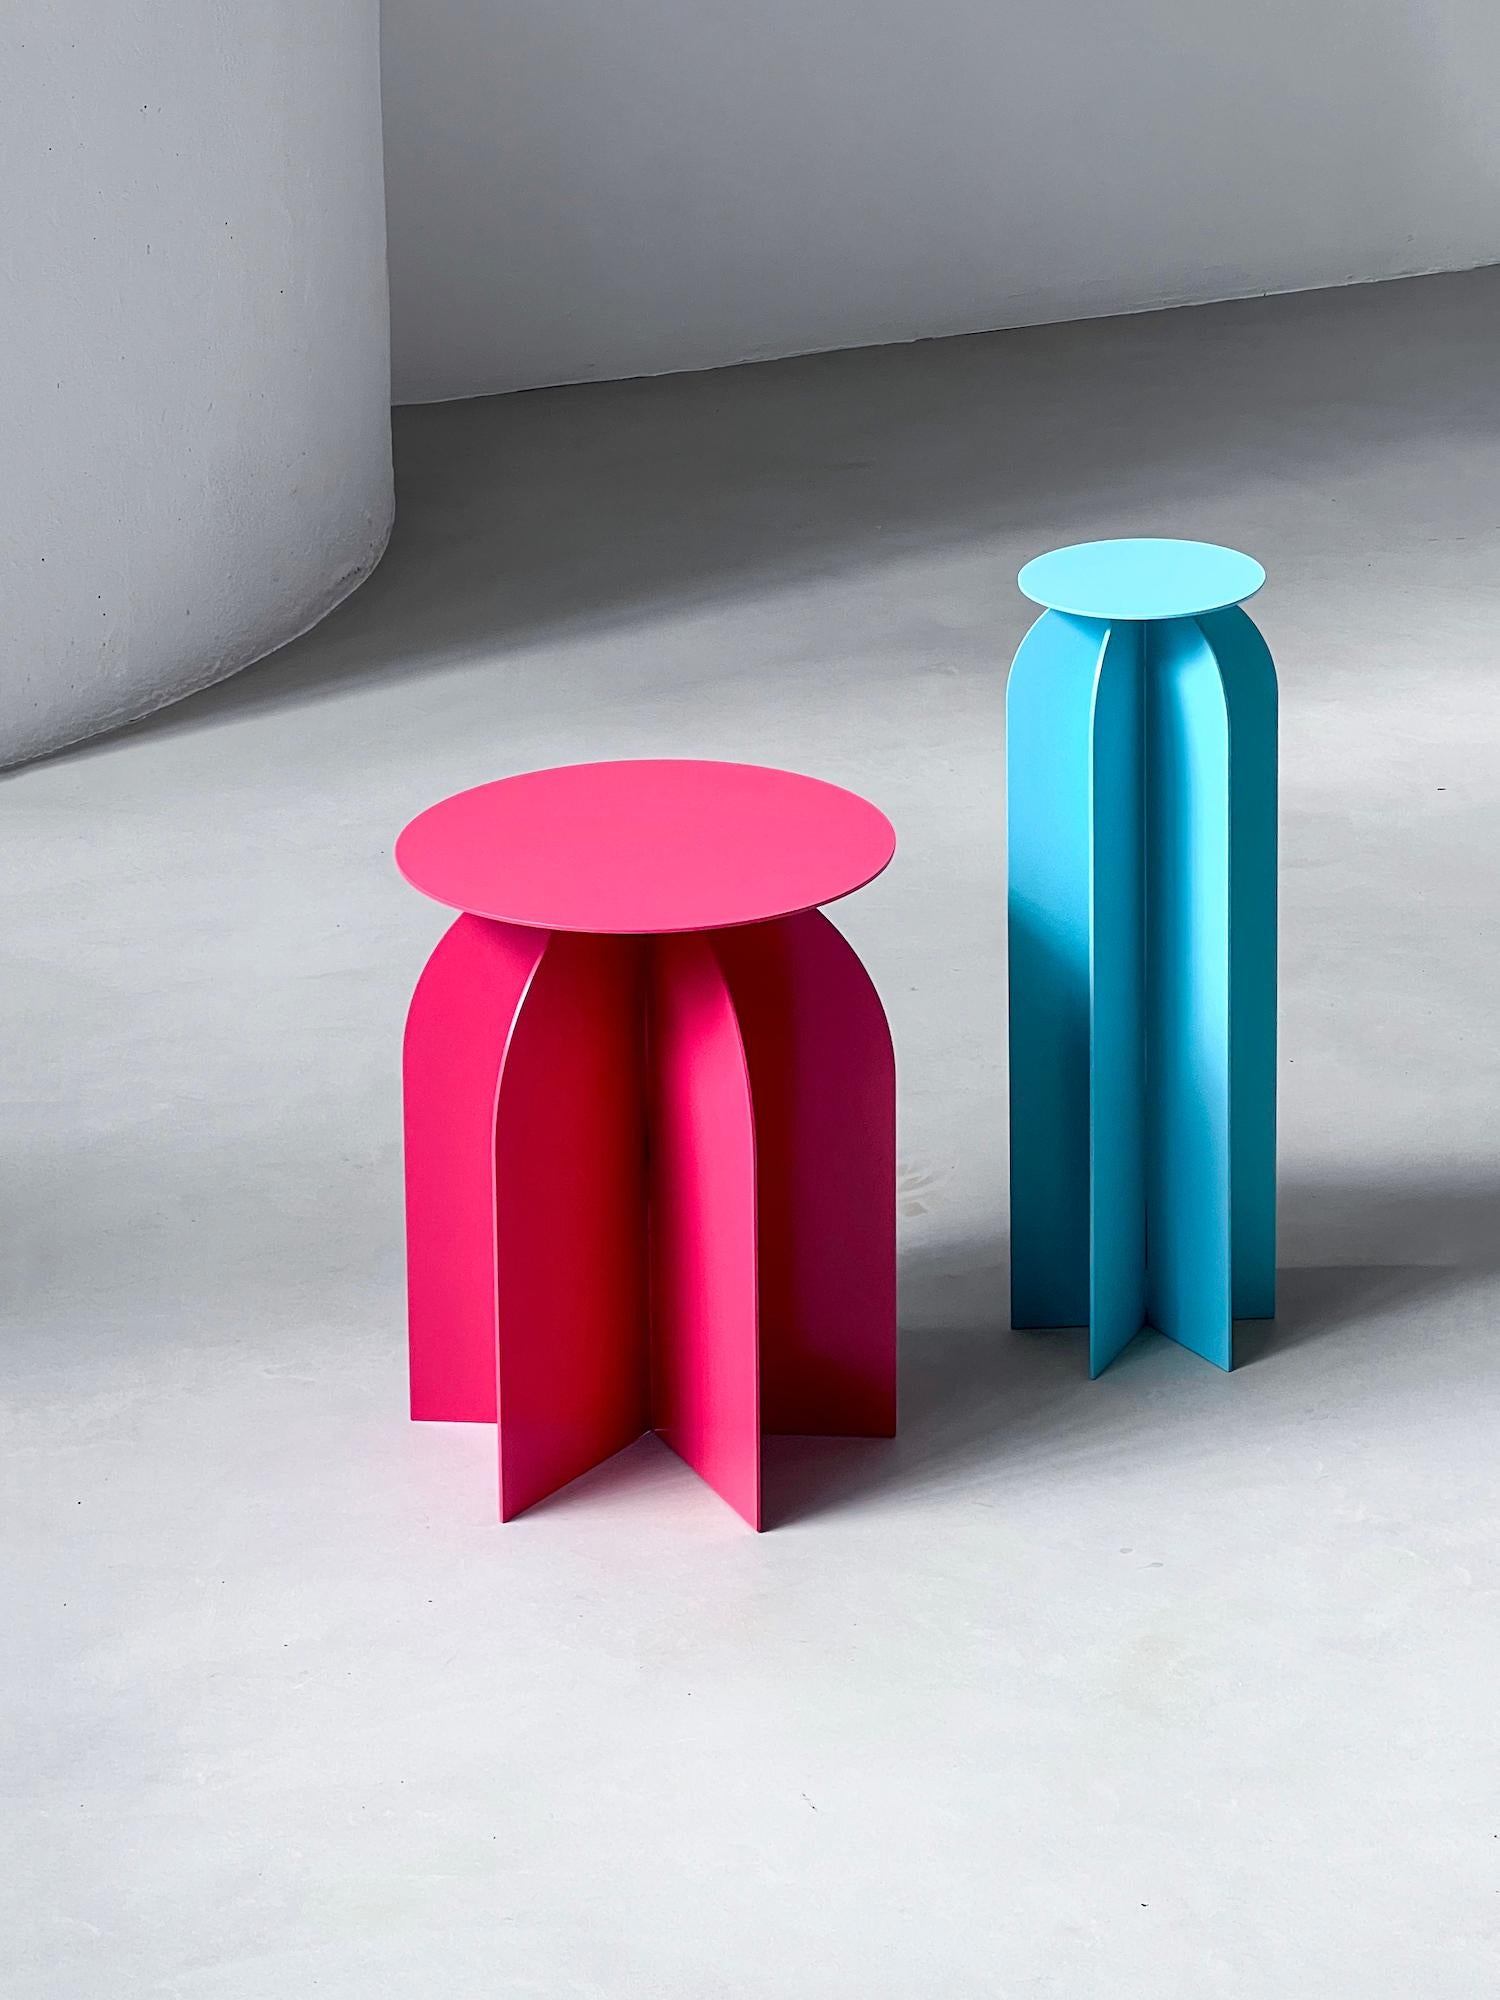 Decorative Side Table - Sculptural End Table - Living Room Architectural Table

The Palladium Side Table is one of our most loved and best selling products. This year, on occasion of the 2024 Milano Design Week, we have launched a different version